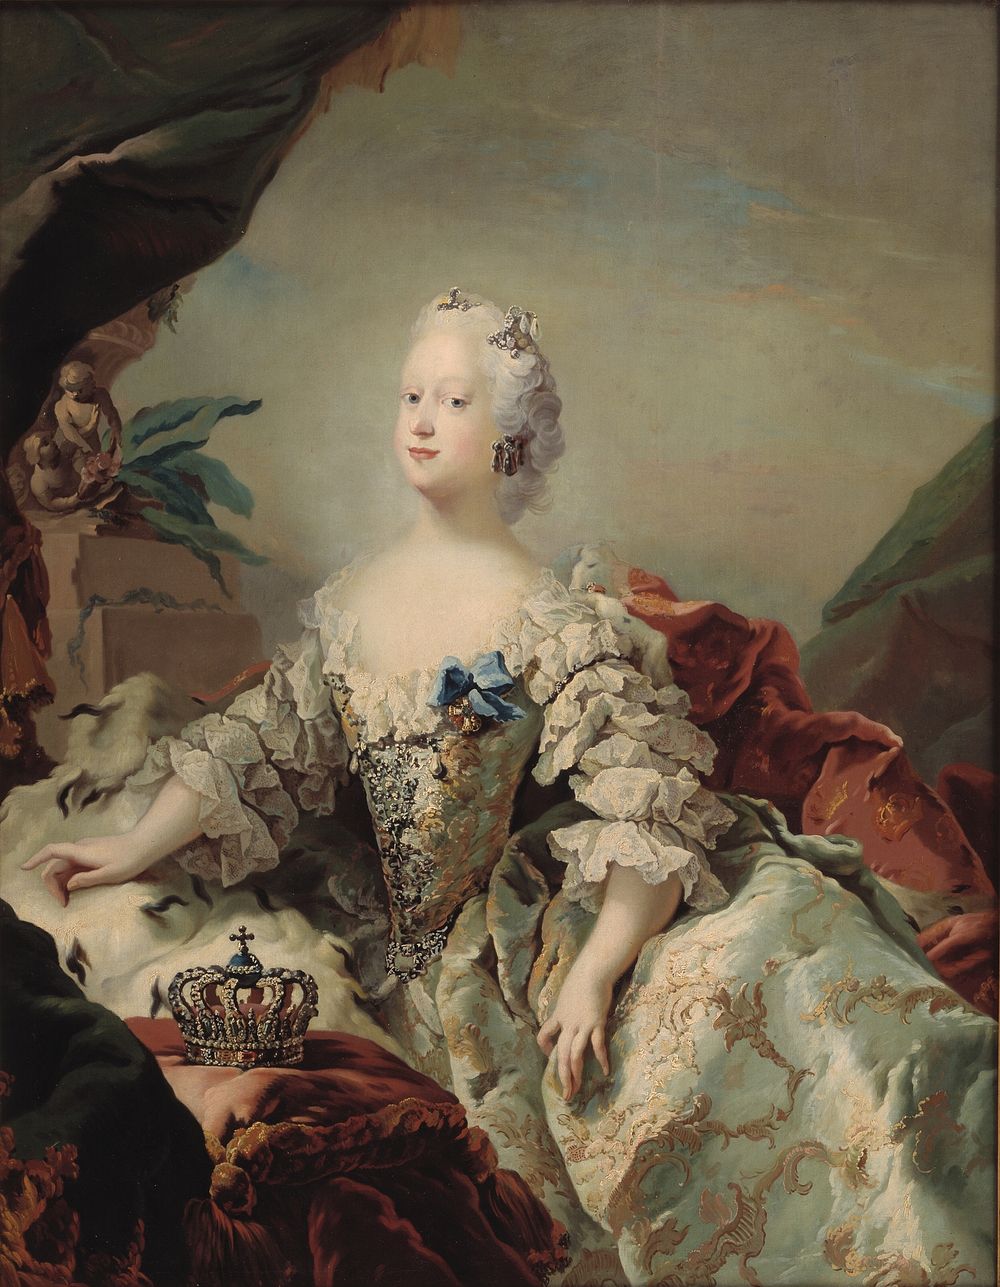 Portrait of Louise, Frederik V's first queen, in anointing dress by C. G. Pilo